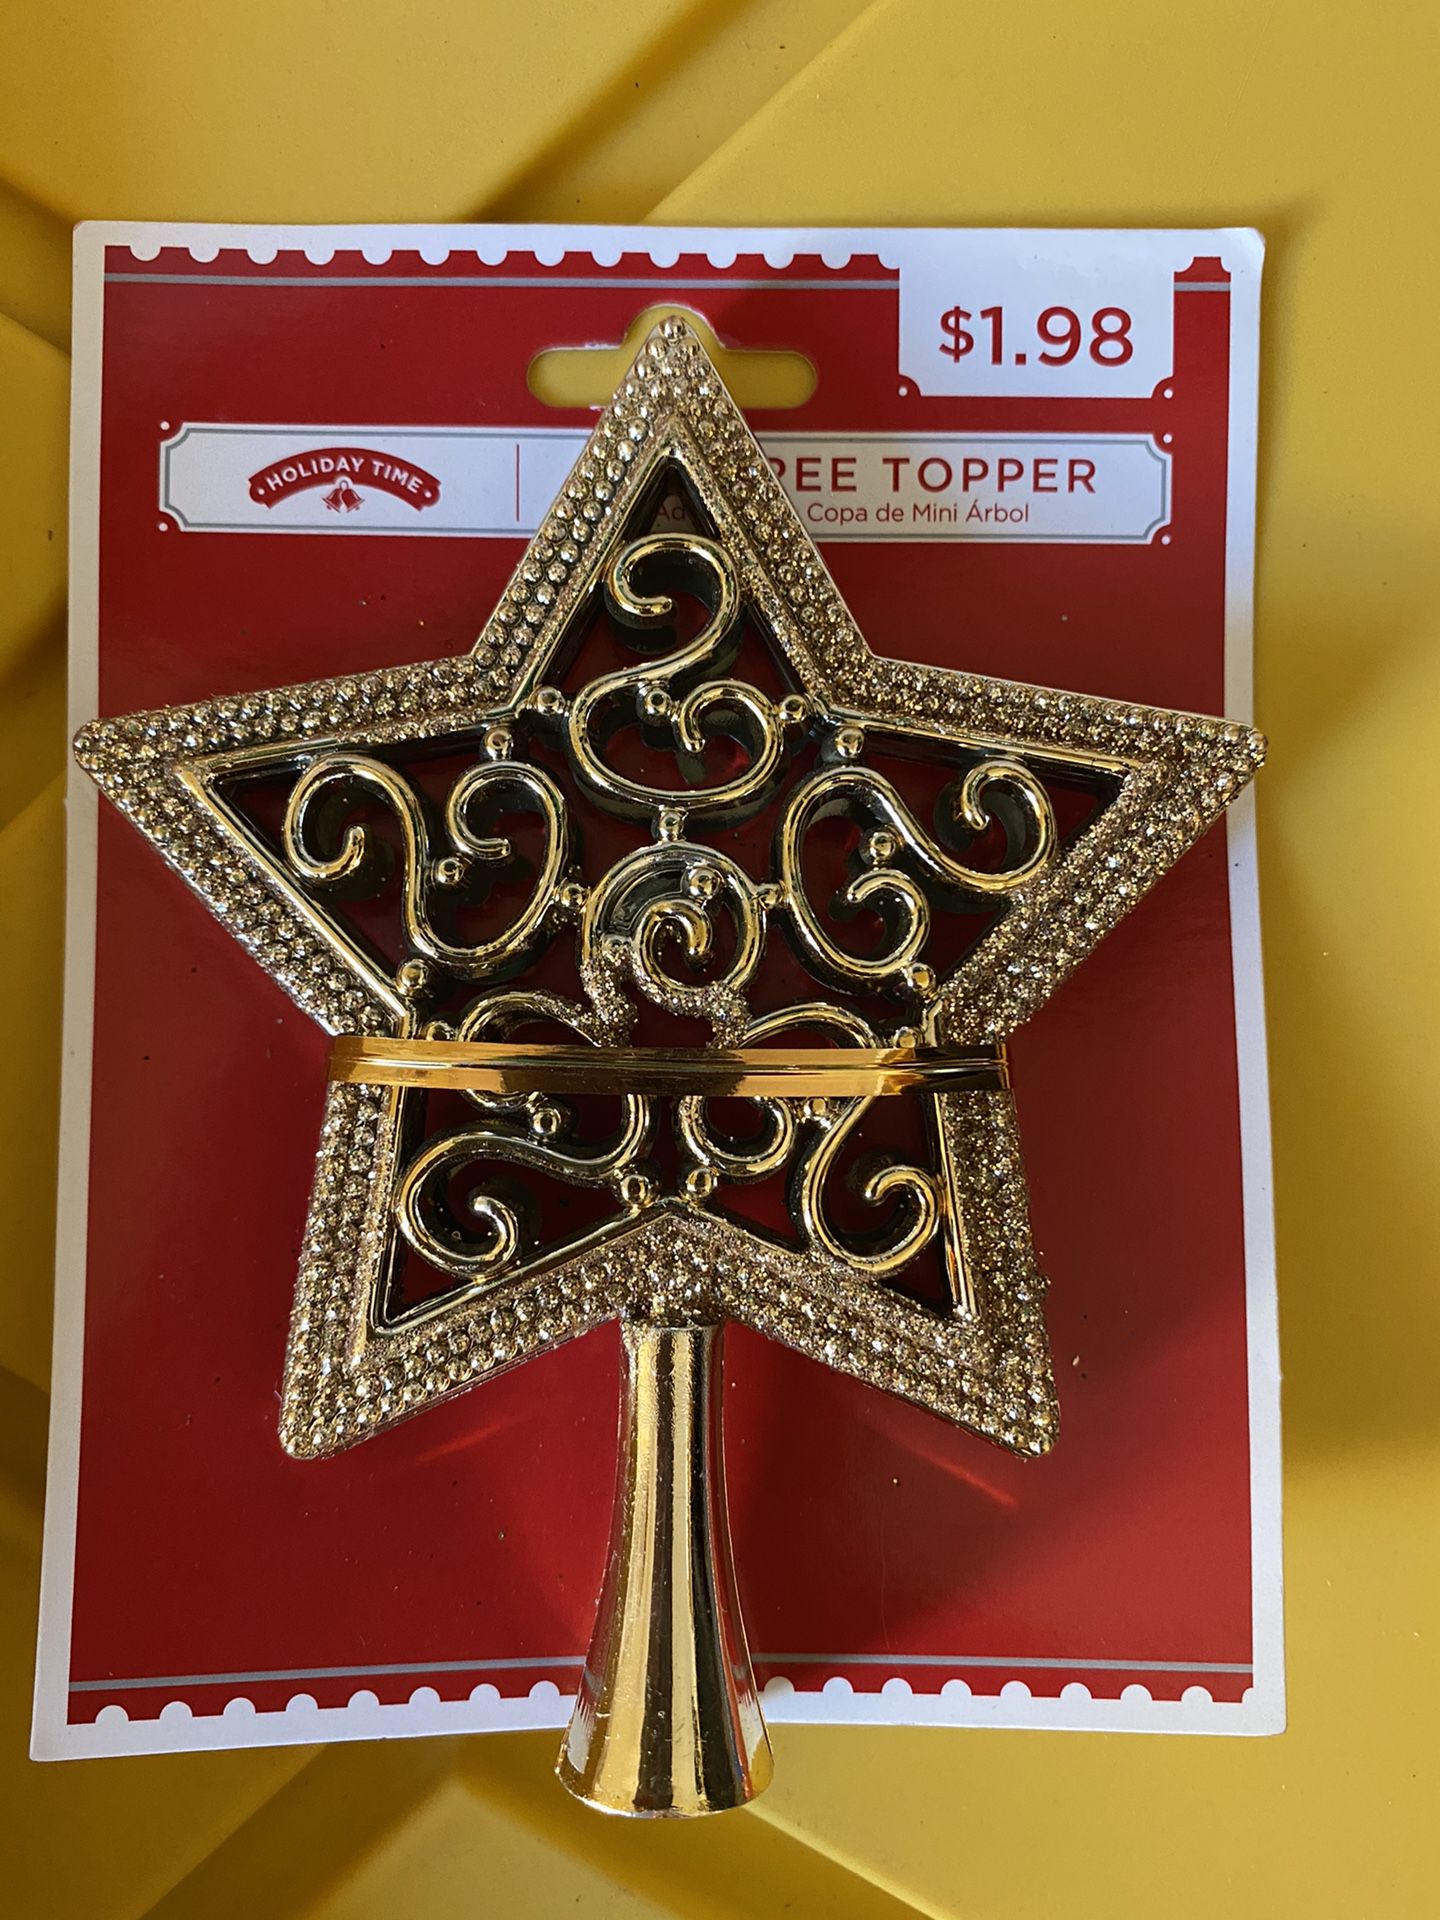 Small gold tree topper